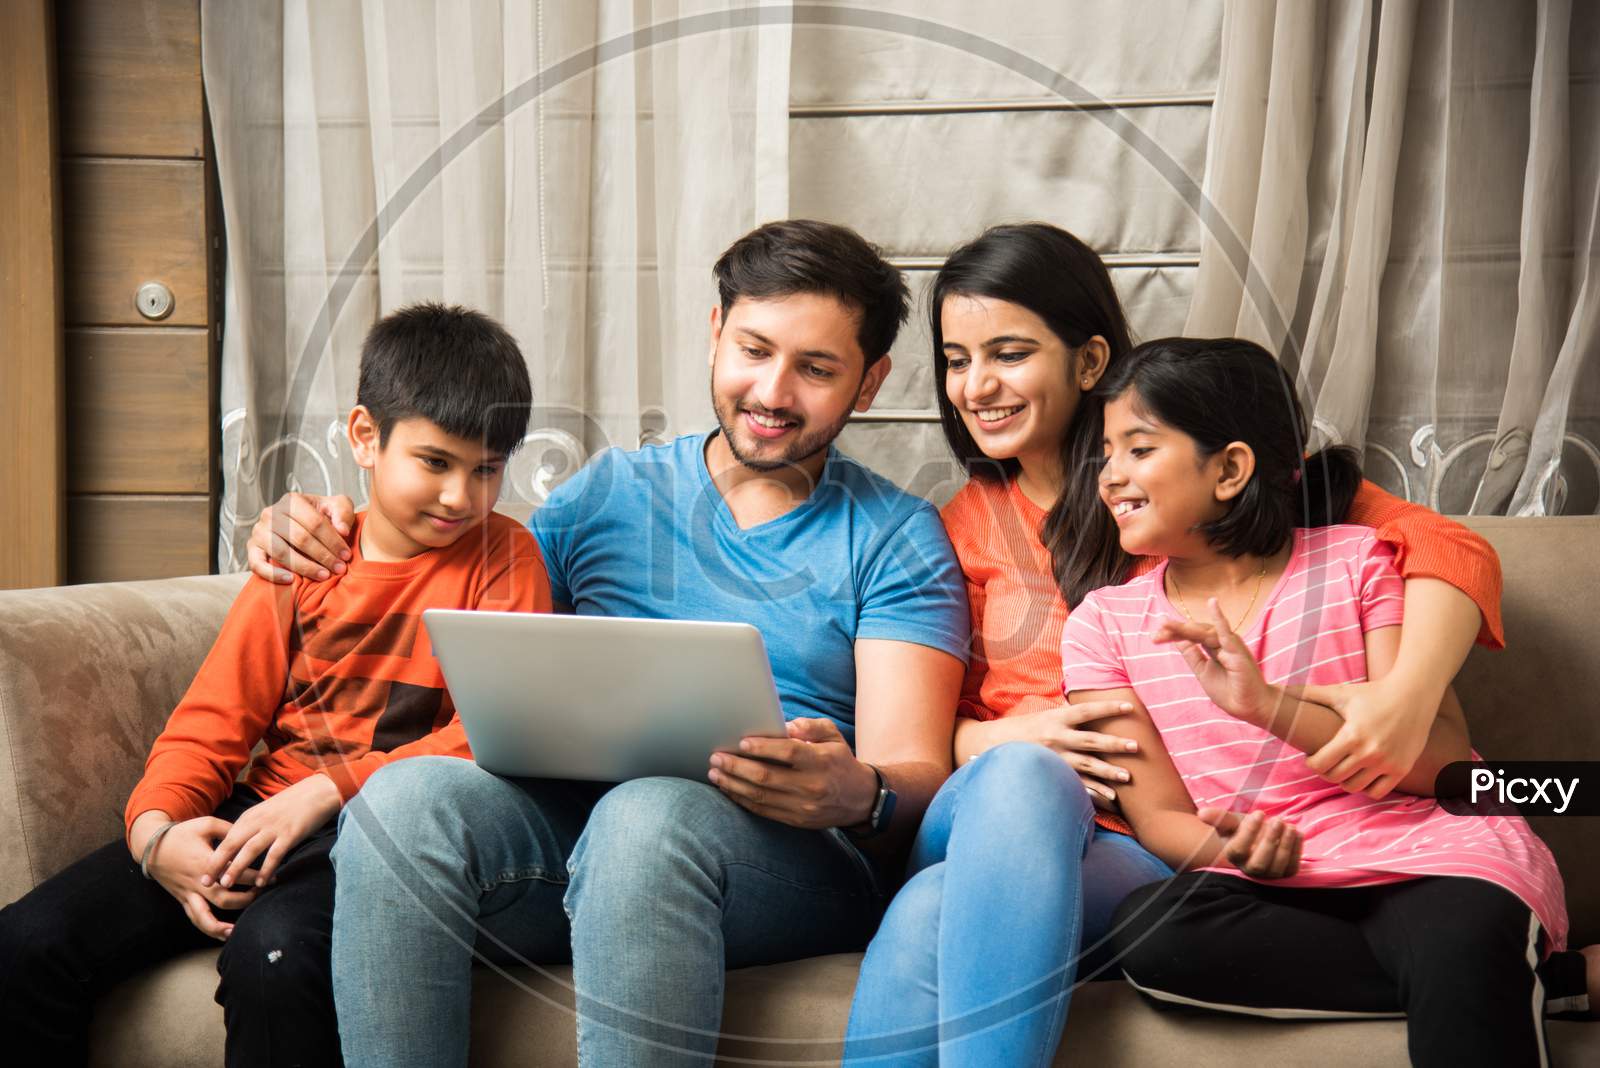 Indian family using laptop or smartphone